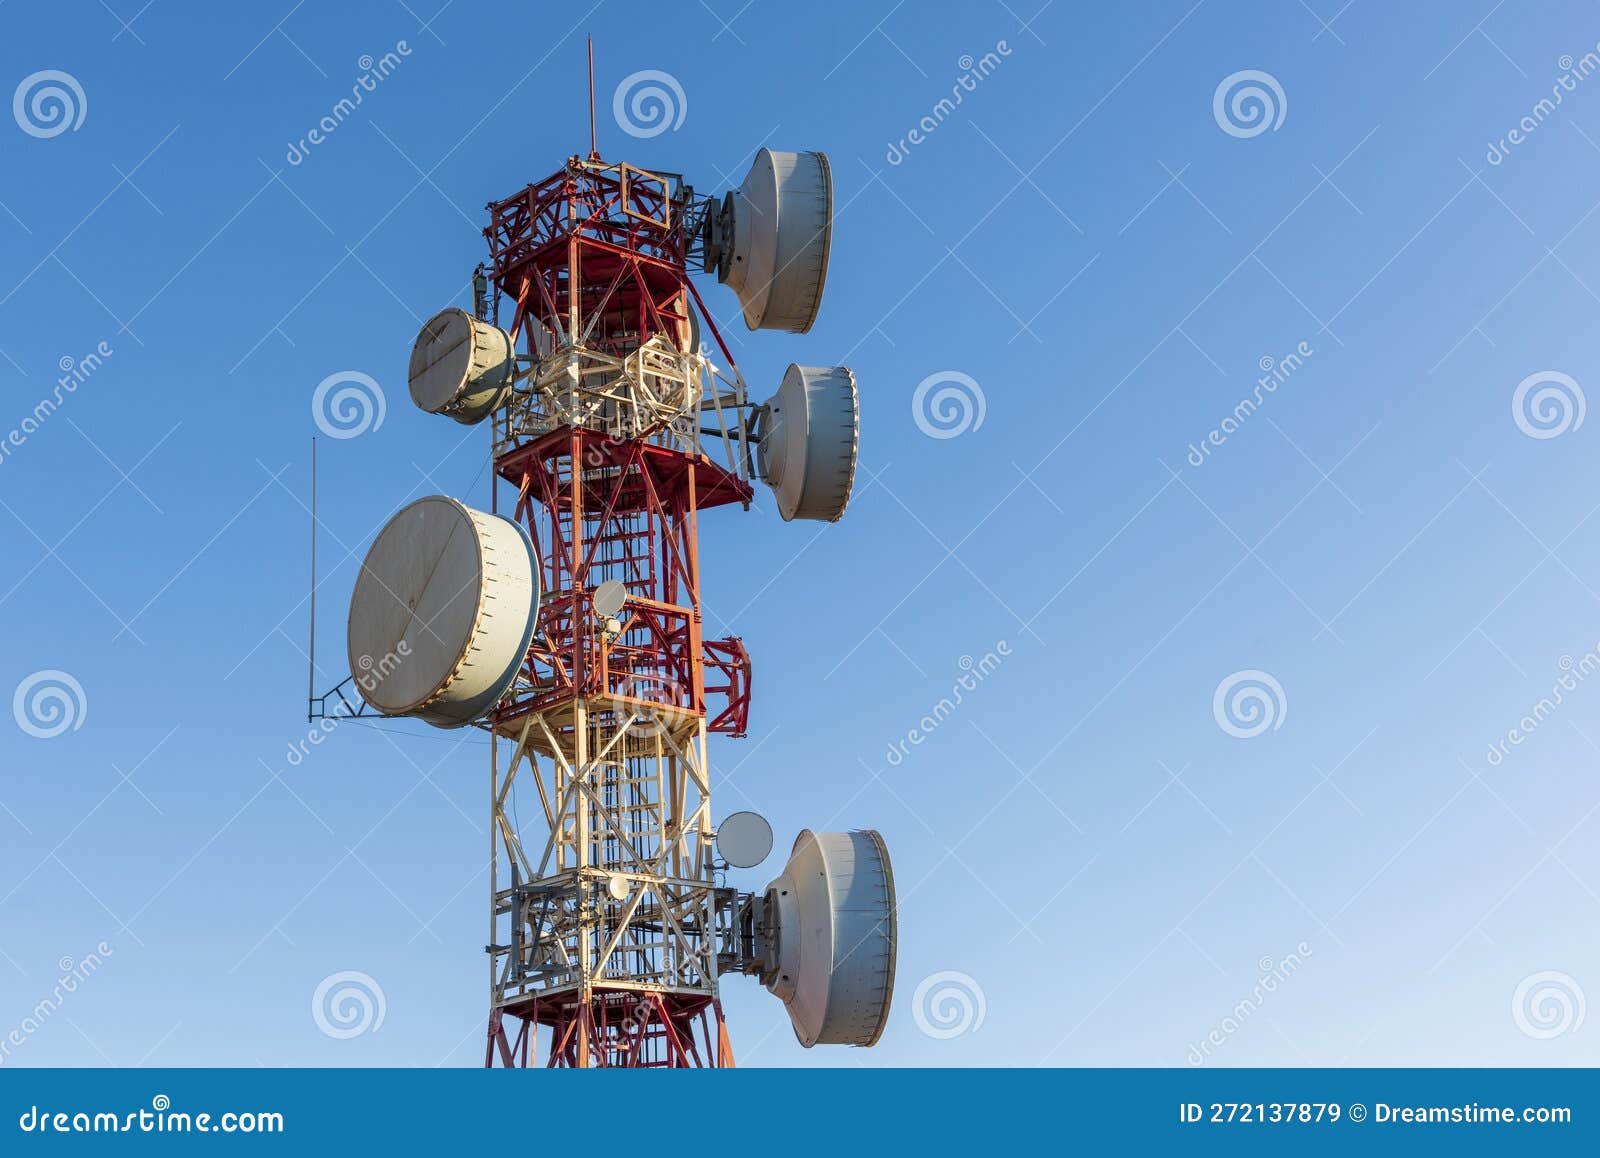 telecommunication towers with blue sky in the background